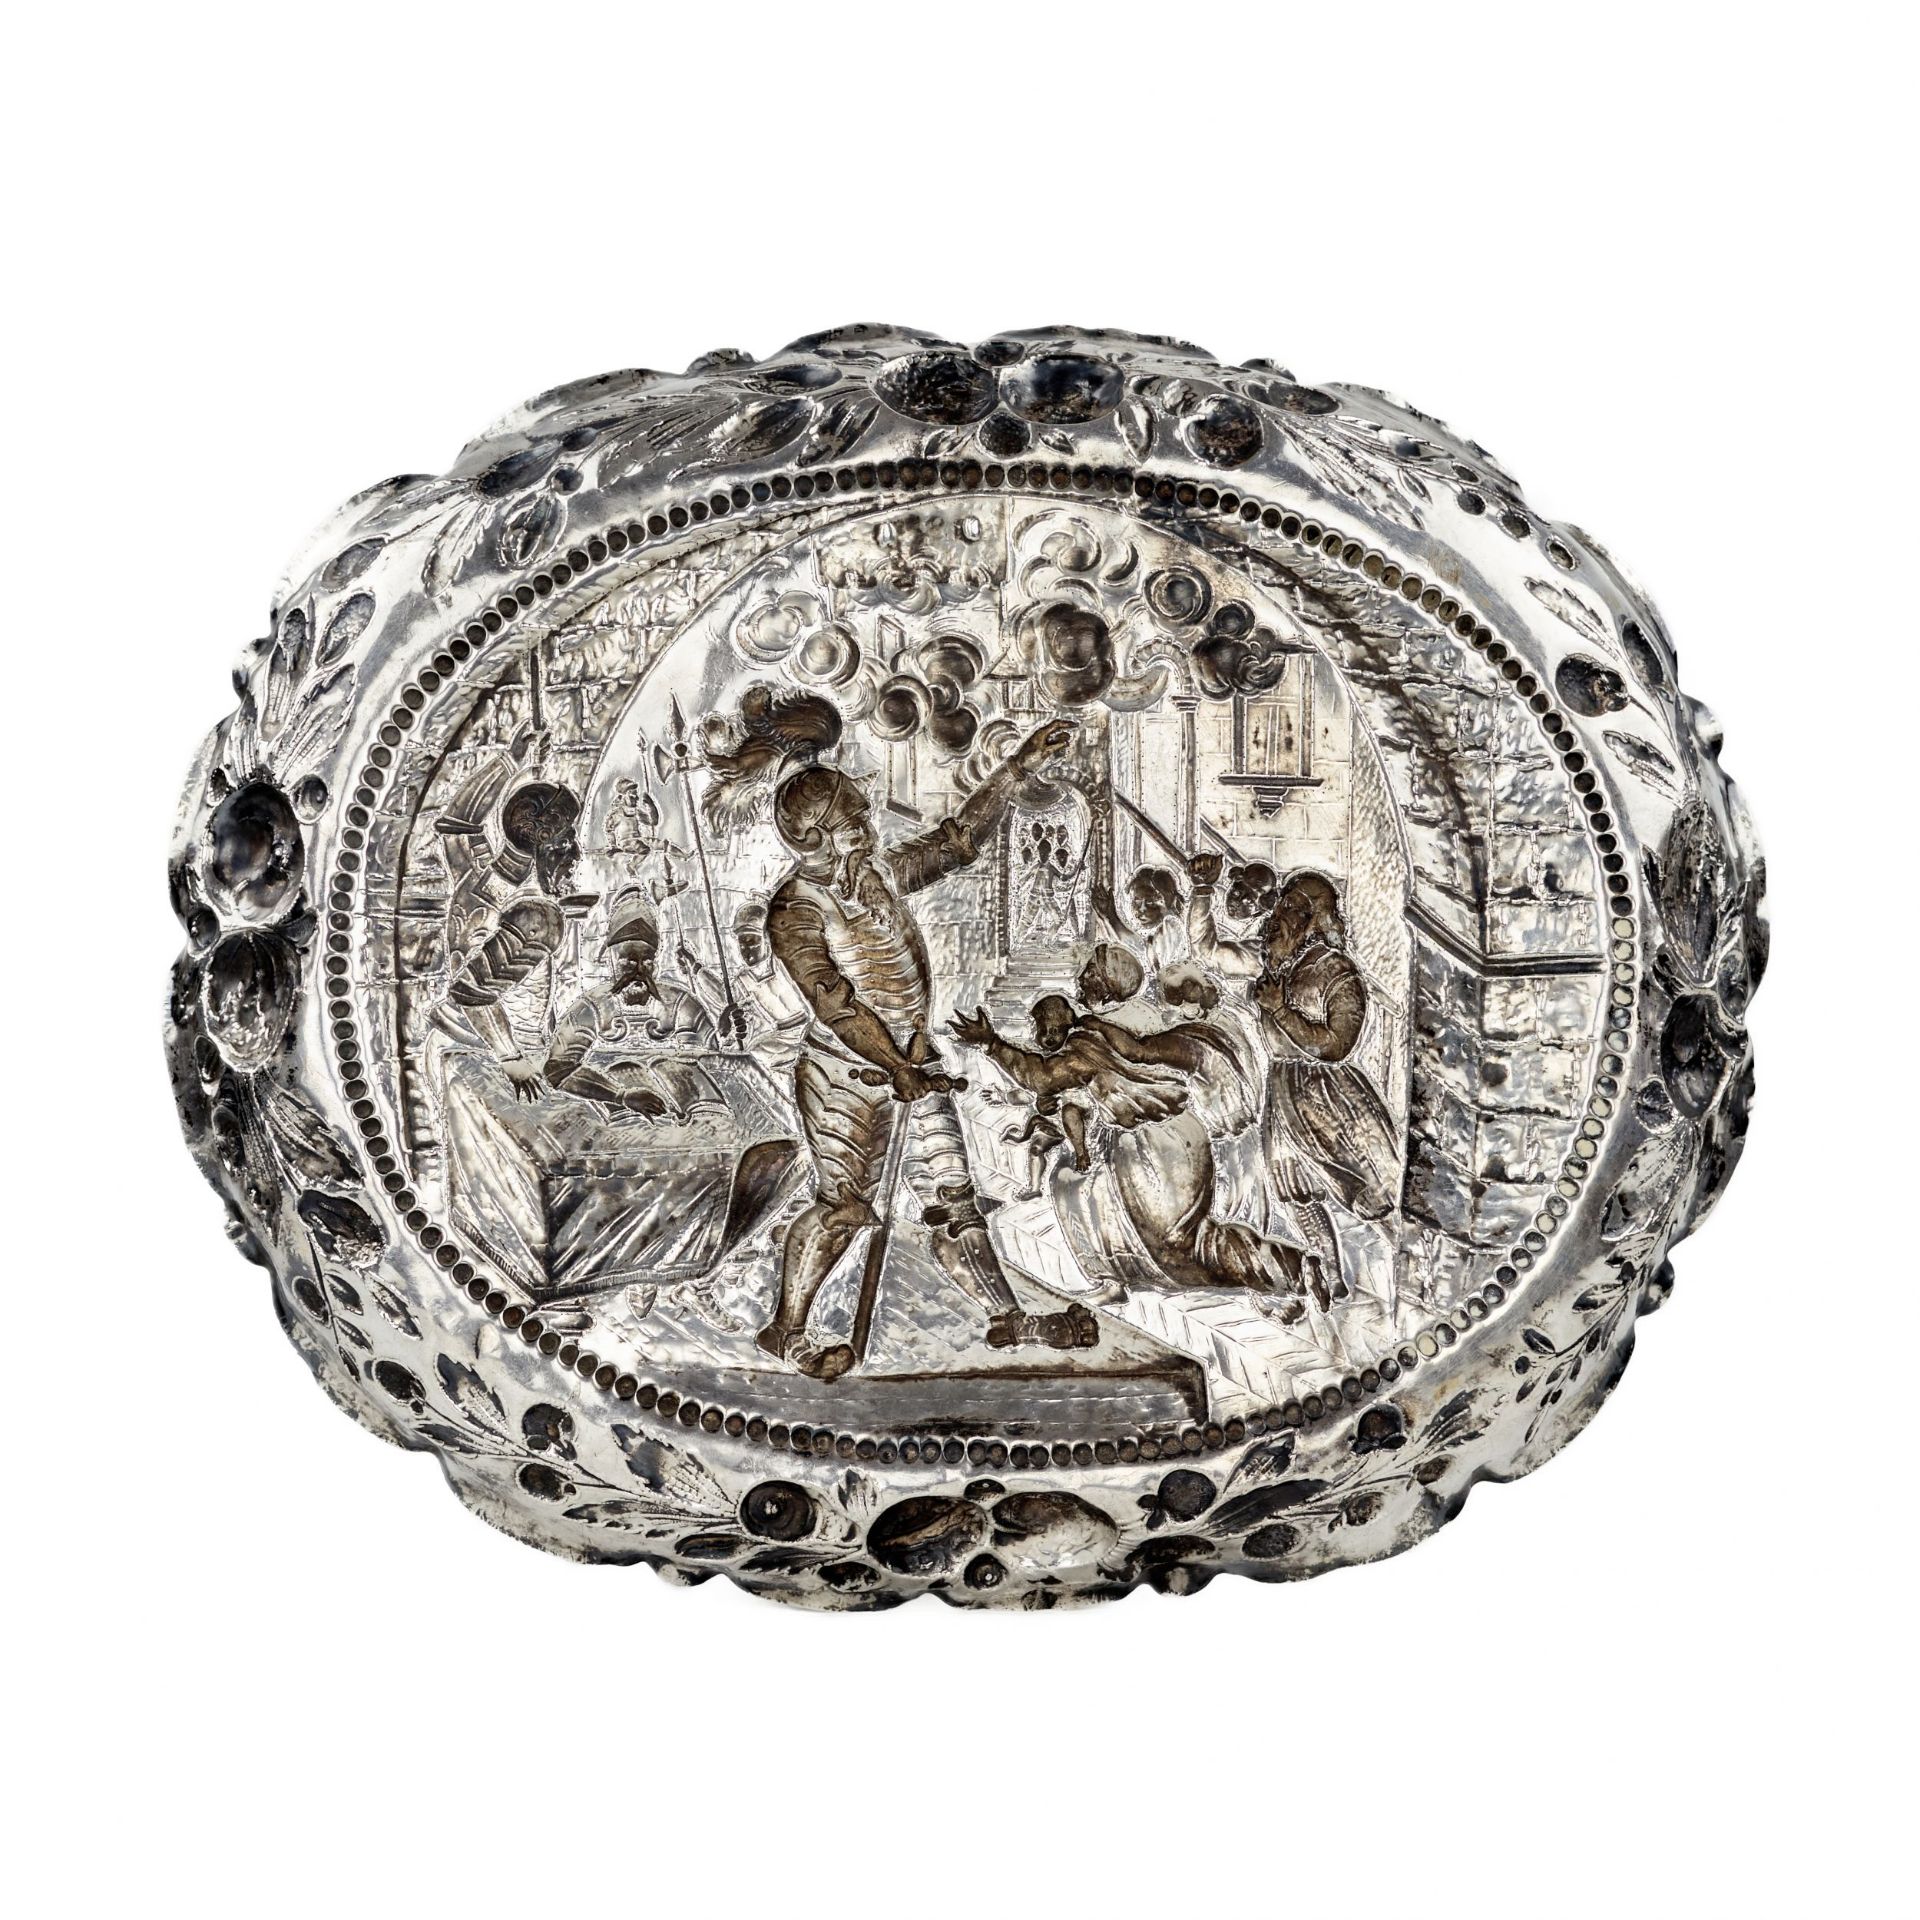 Silver, decorative dish with a scene of a knights court. 19th century. - Image 3 of 4